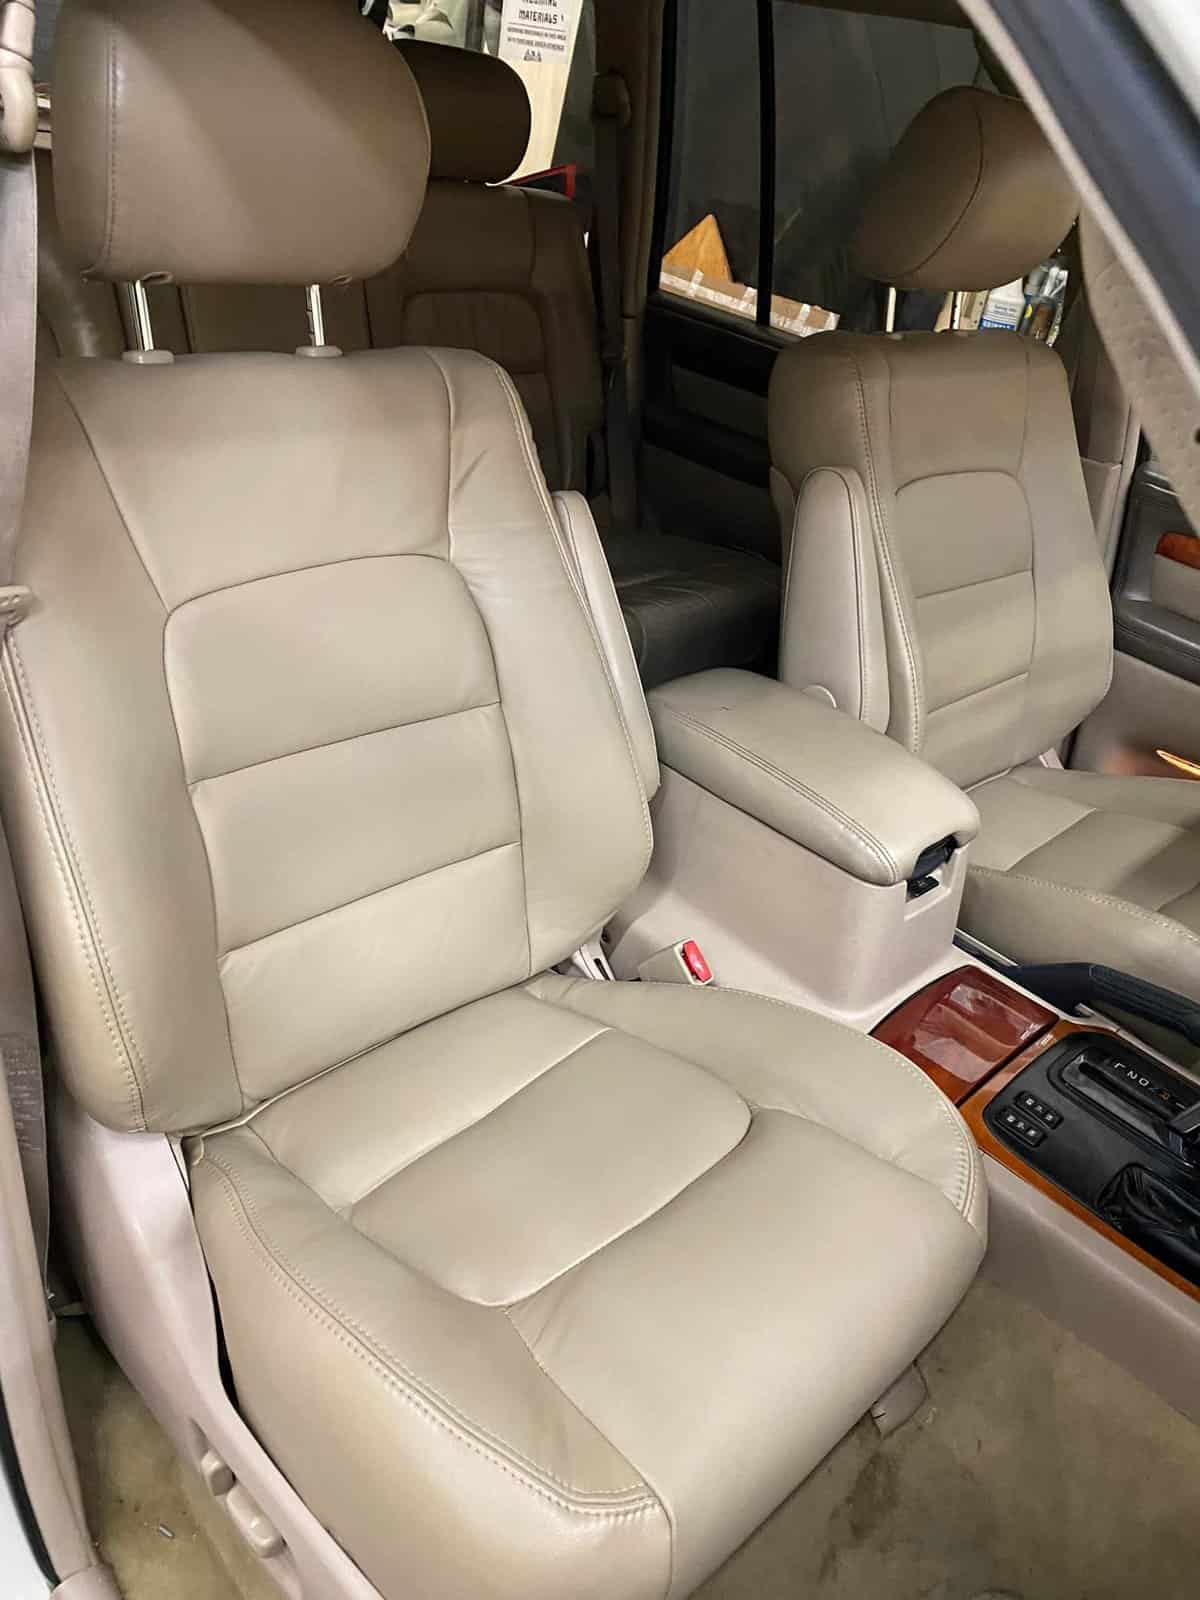 Car Upholstery Maintenance - Recovered Vehicle Interior